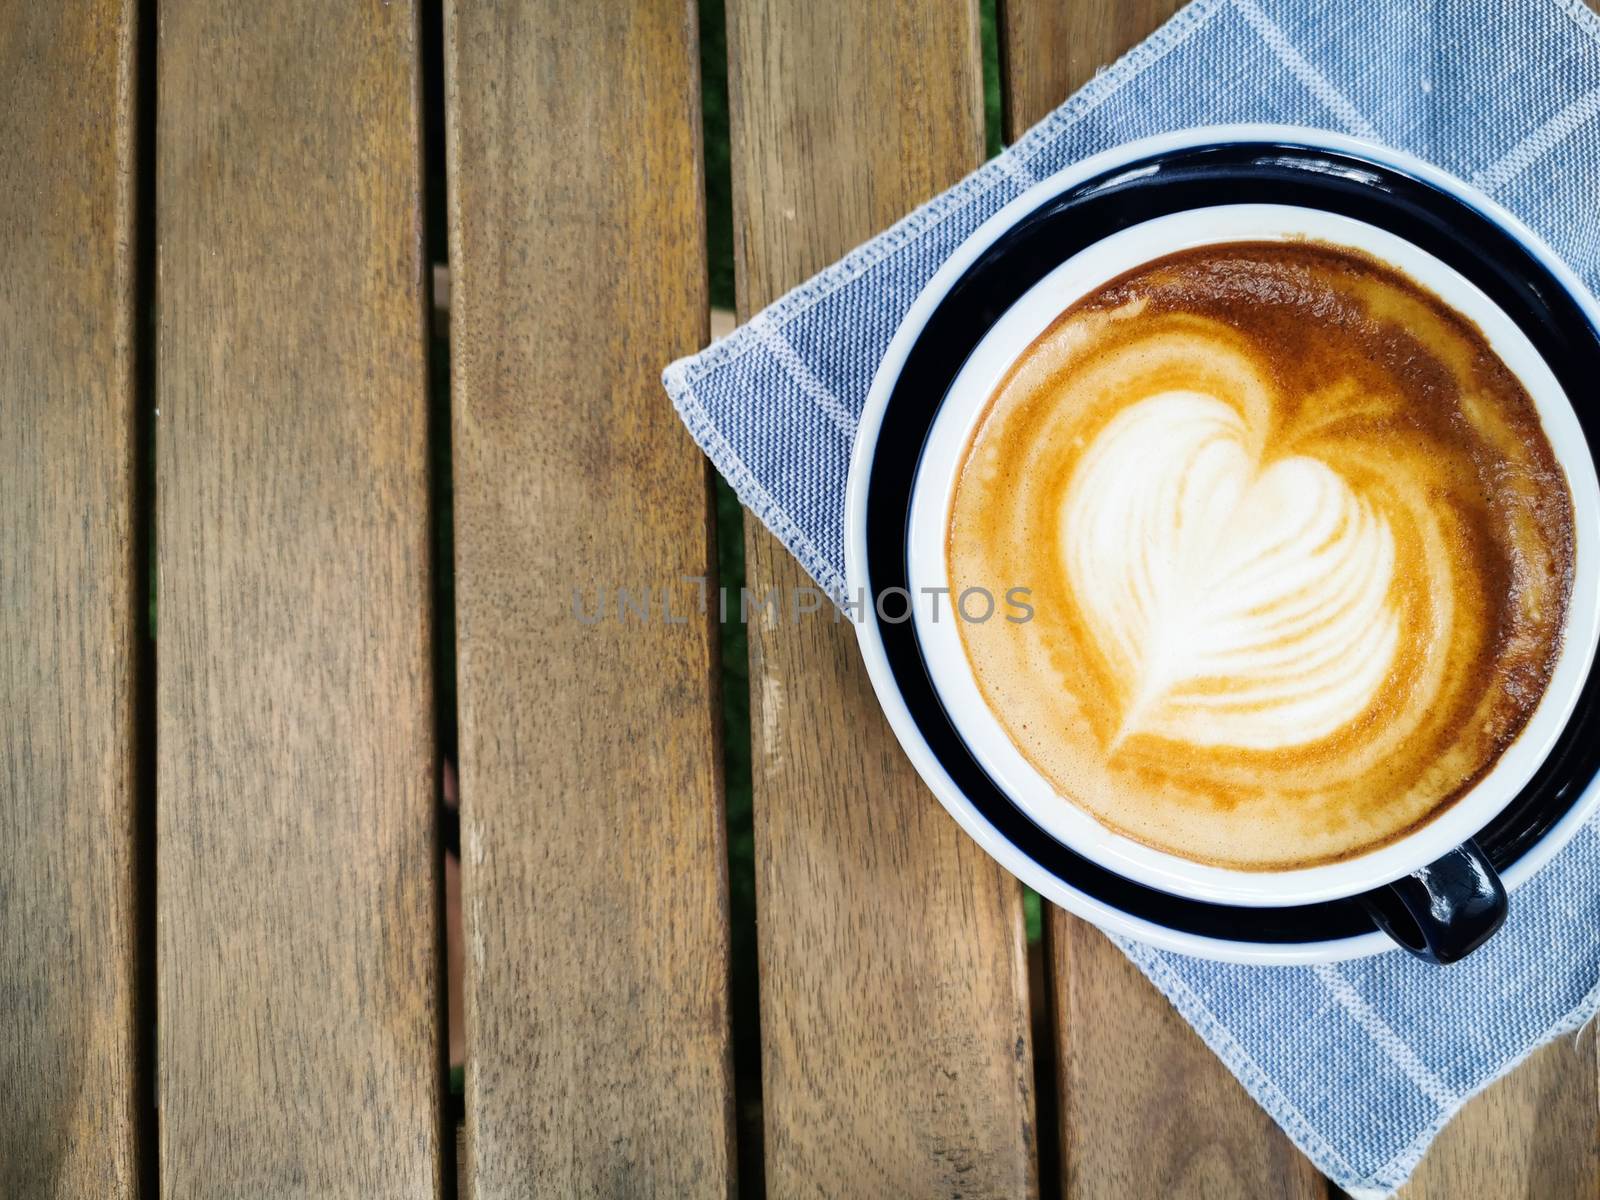 A cup of coffee with beautiful latte art on wood table background.